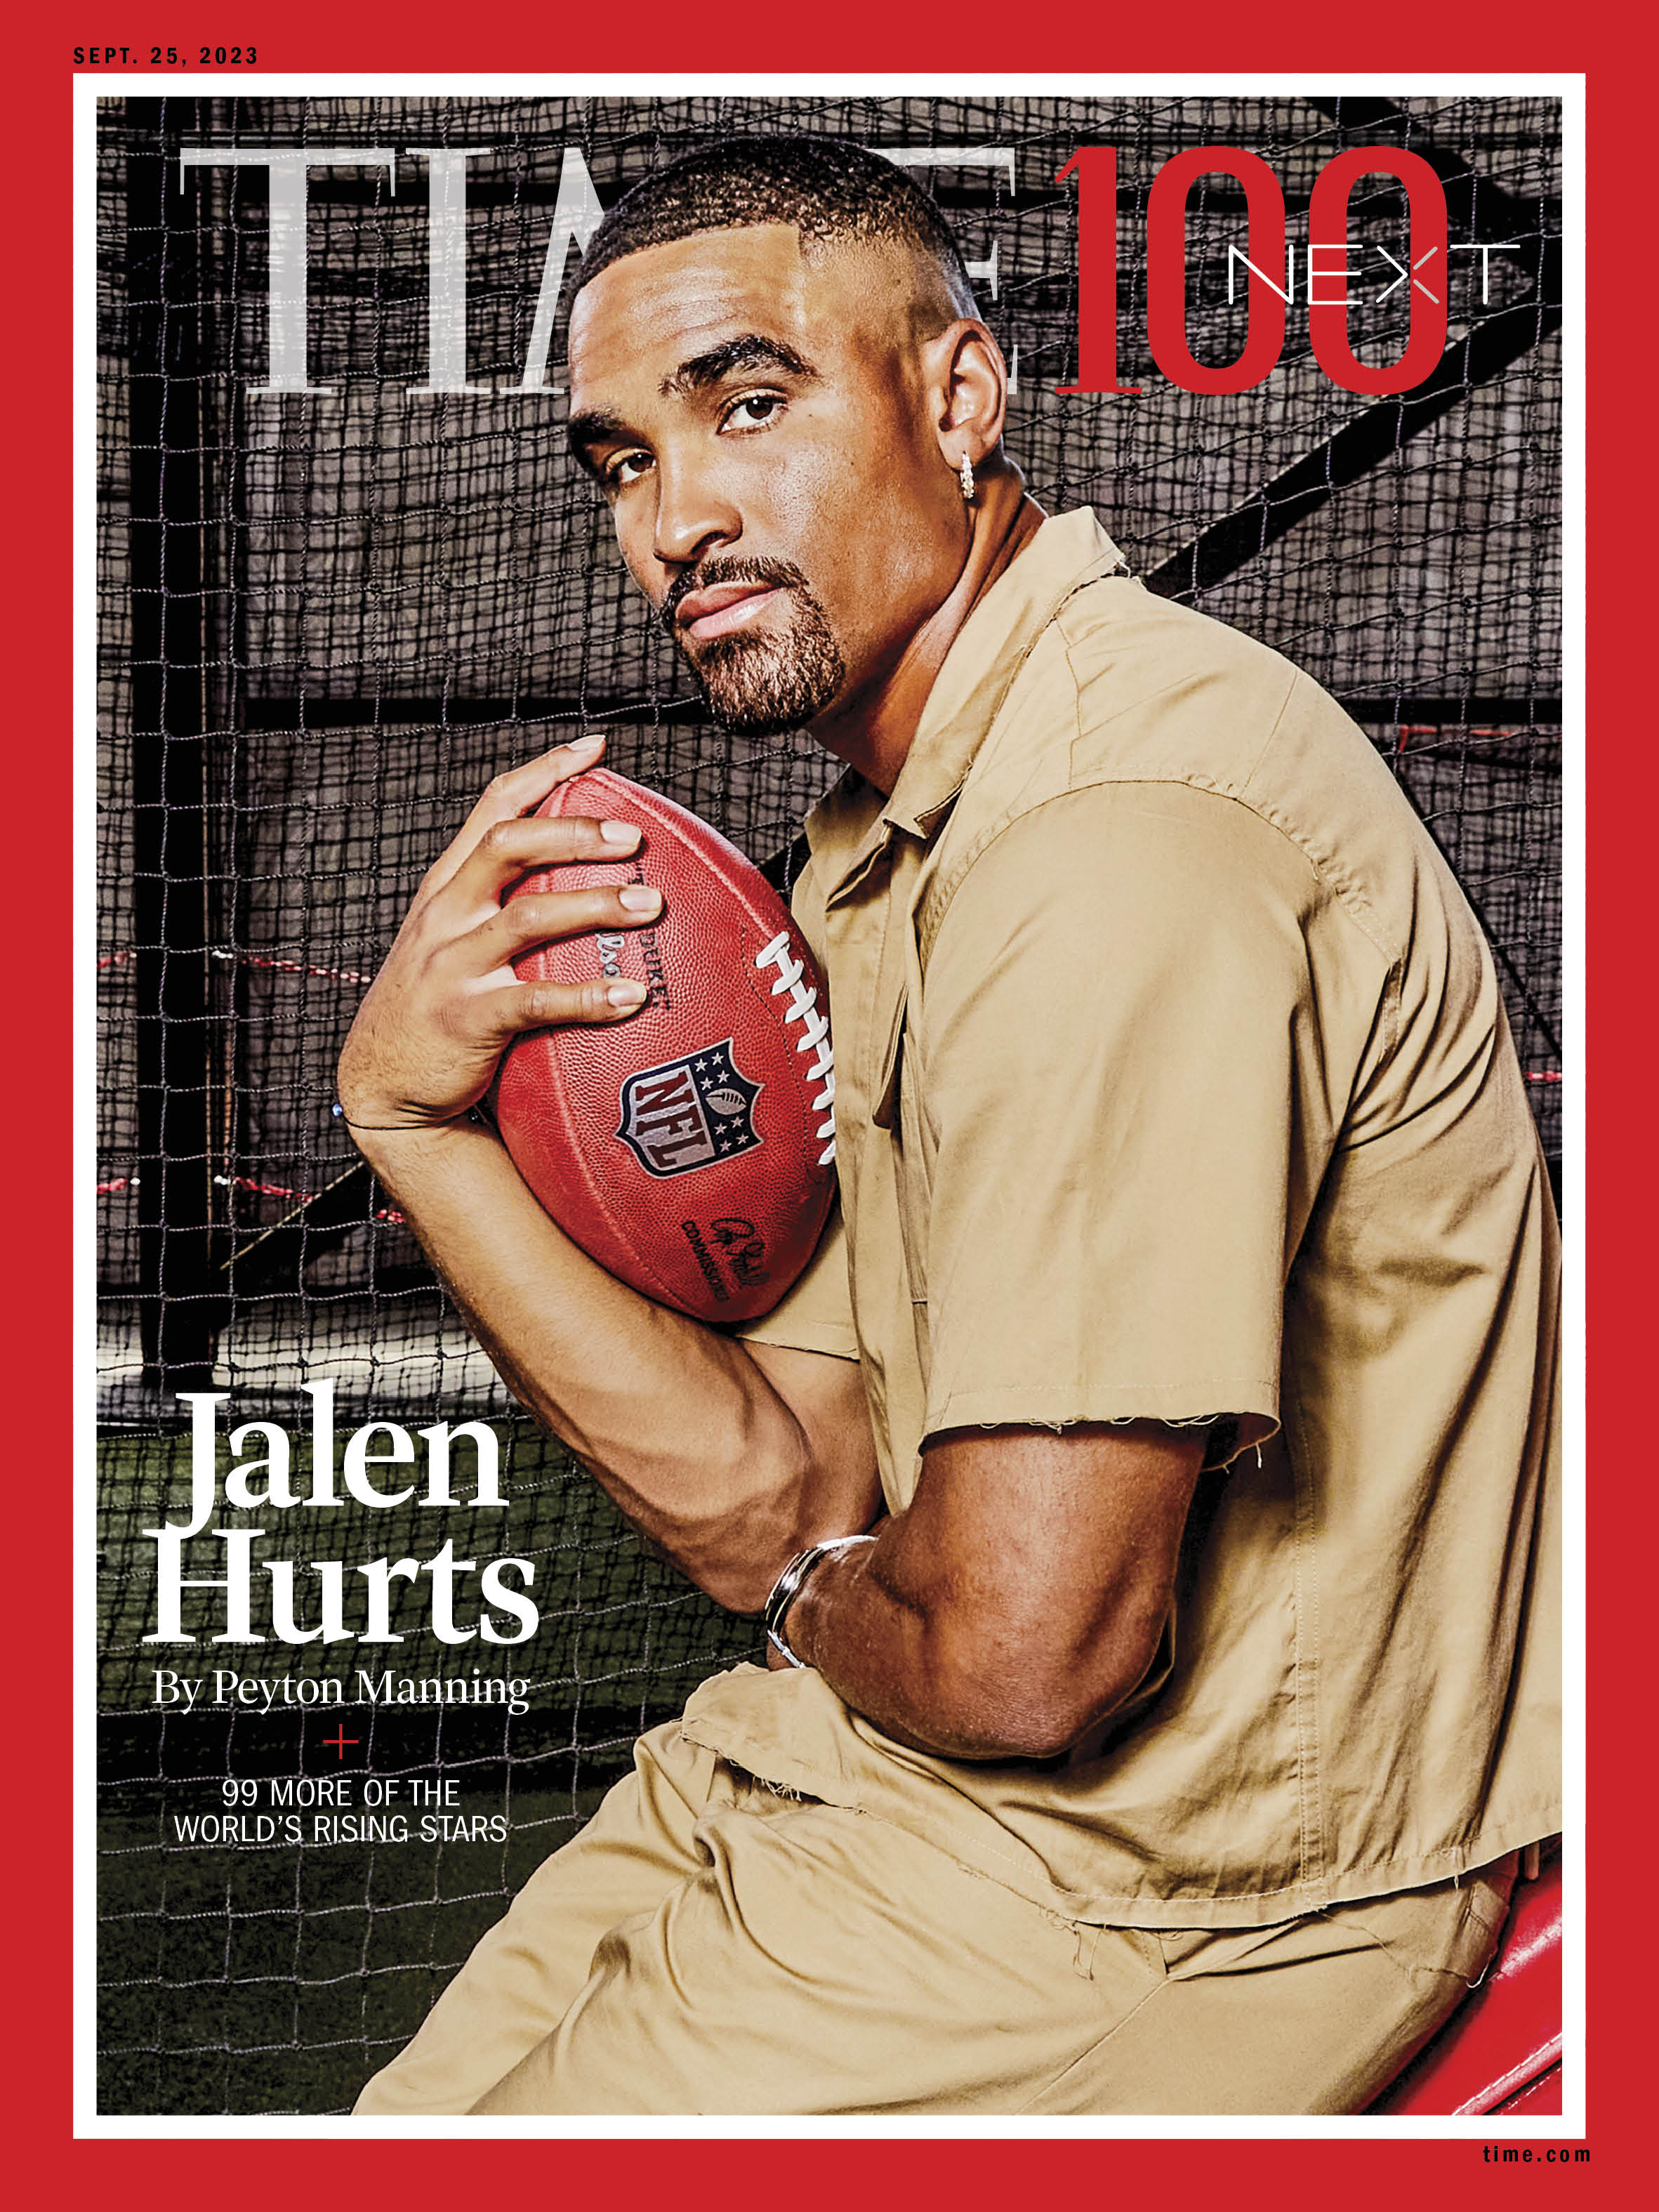 Time 100 Next Jalen Hurts Time Magazine cover